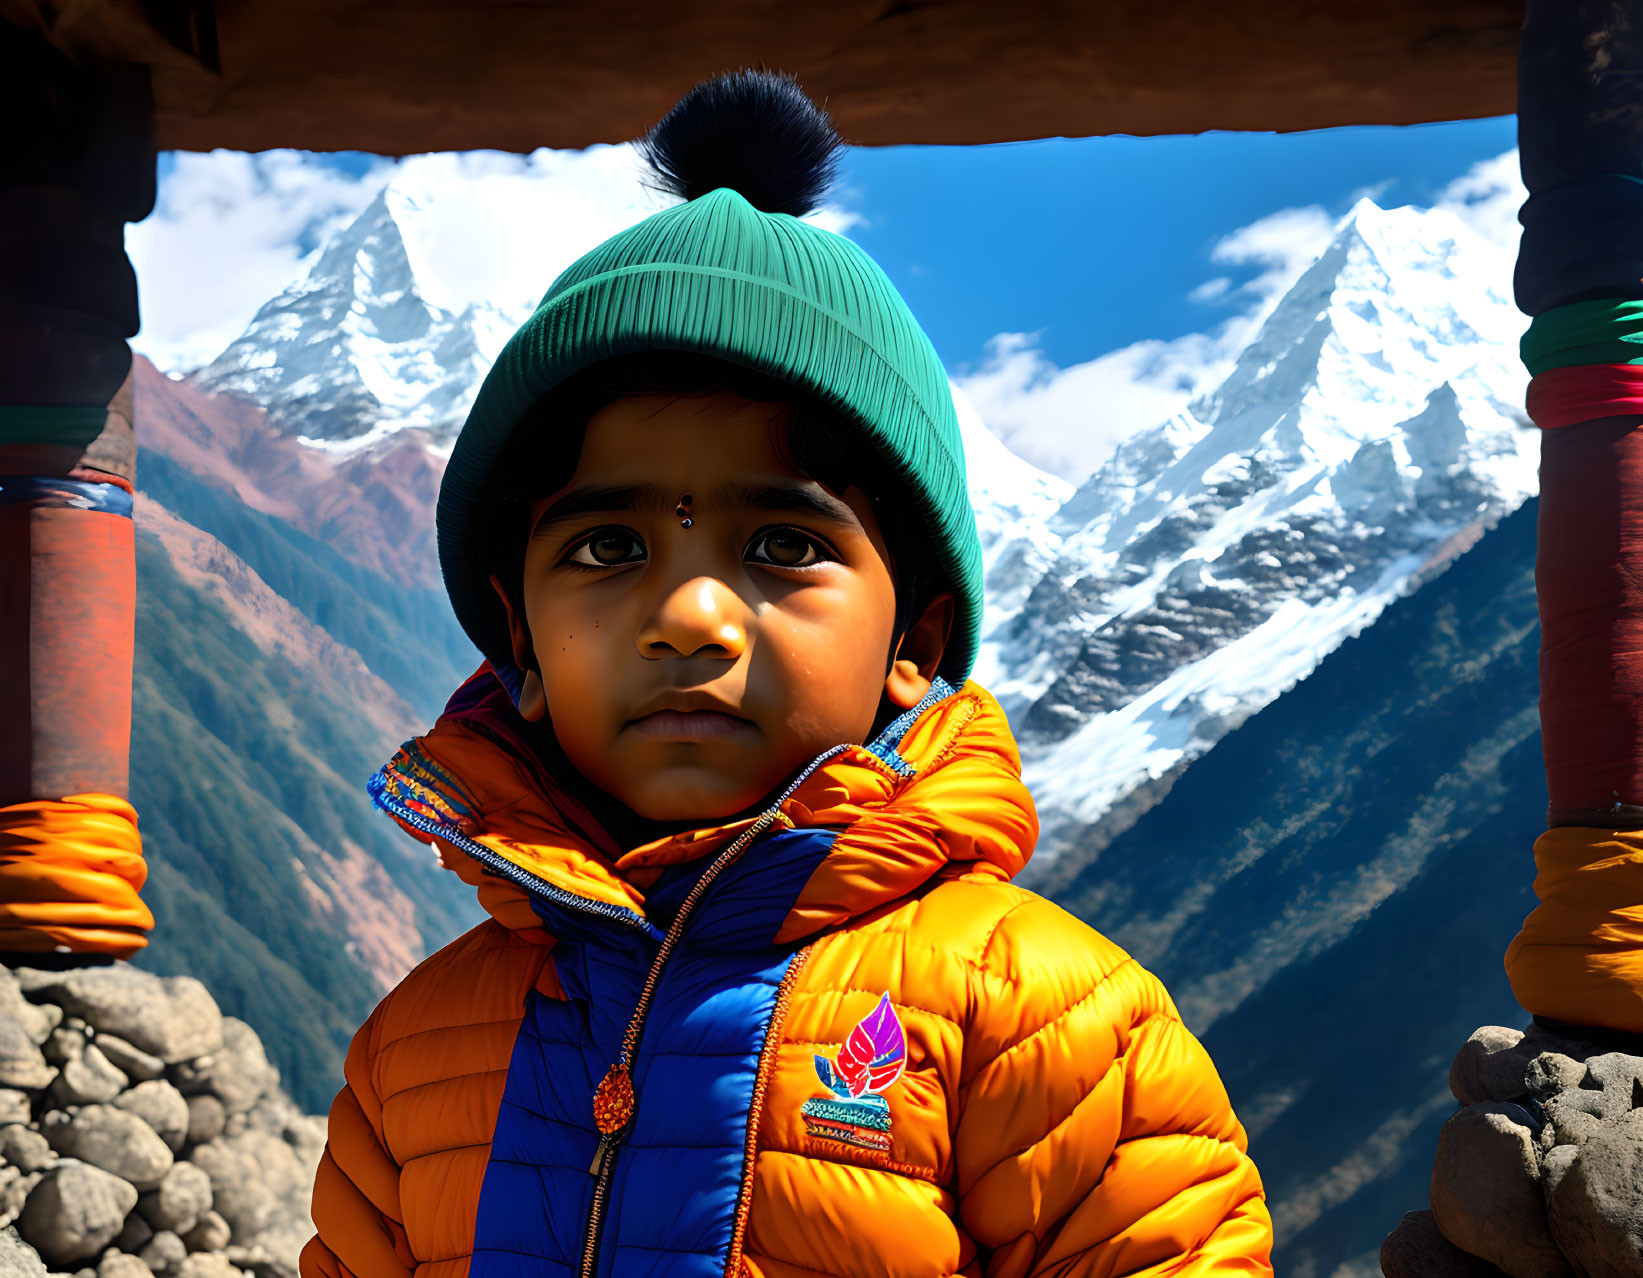 Child in Orange Jacket and Green Beanie with Snowy Mountain Background